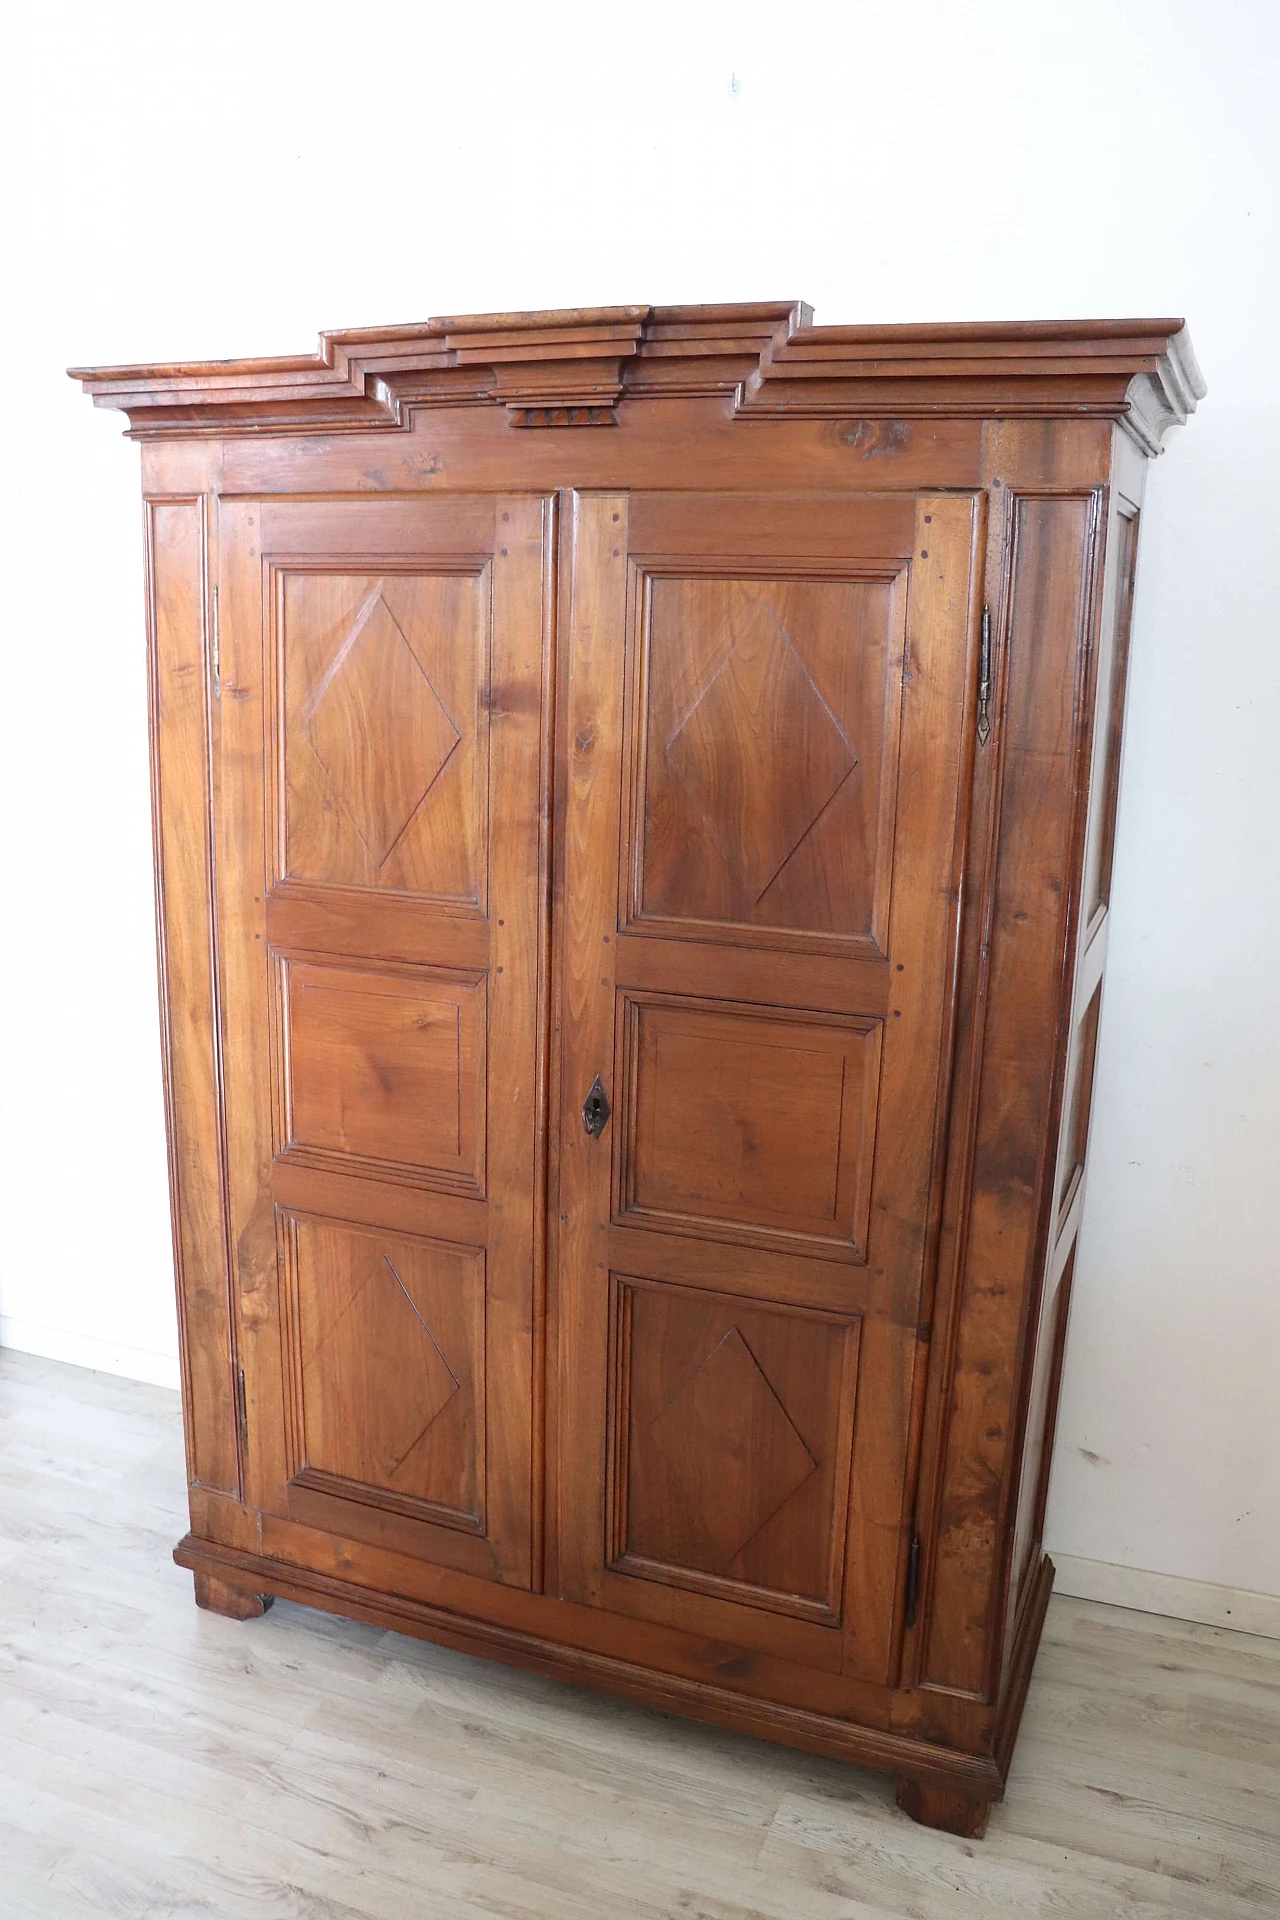 Solid walnut wardrobe with two doors, mid-18th century 17